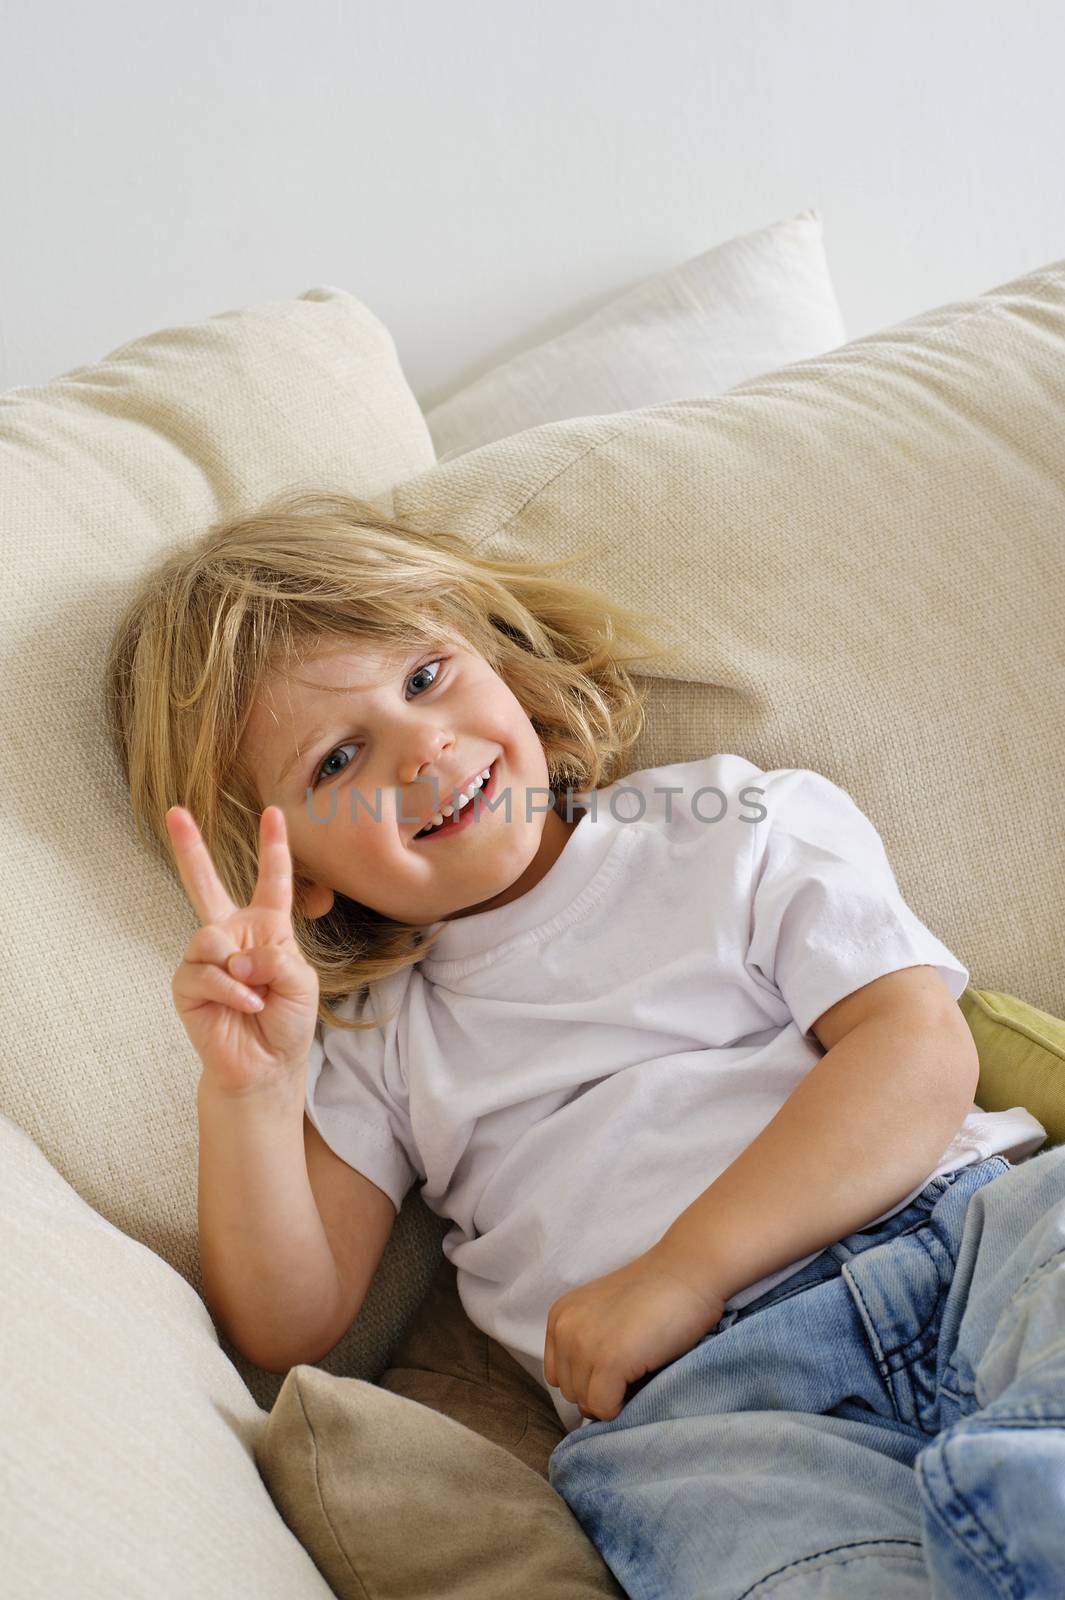 Young boy sitting on sofa looking at camera. He's giving the V sign with his fingers, palm towards the camera